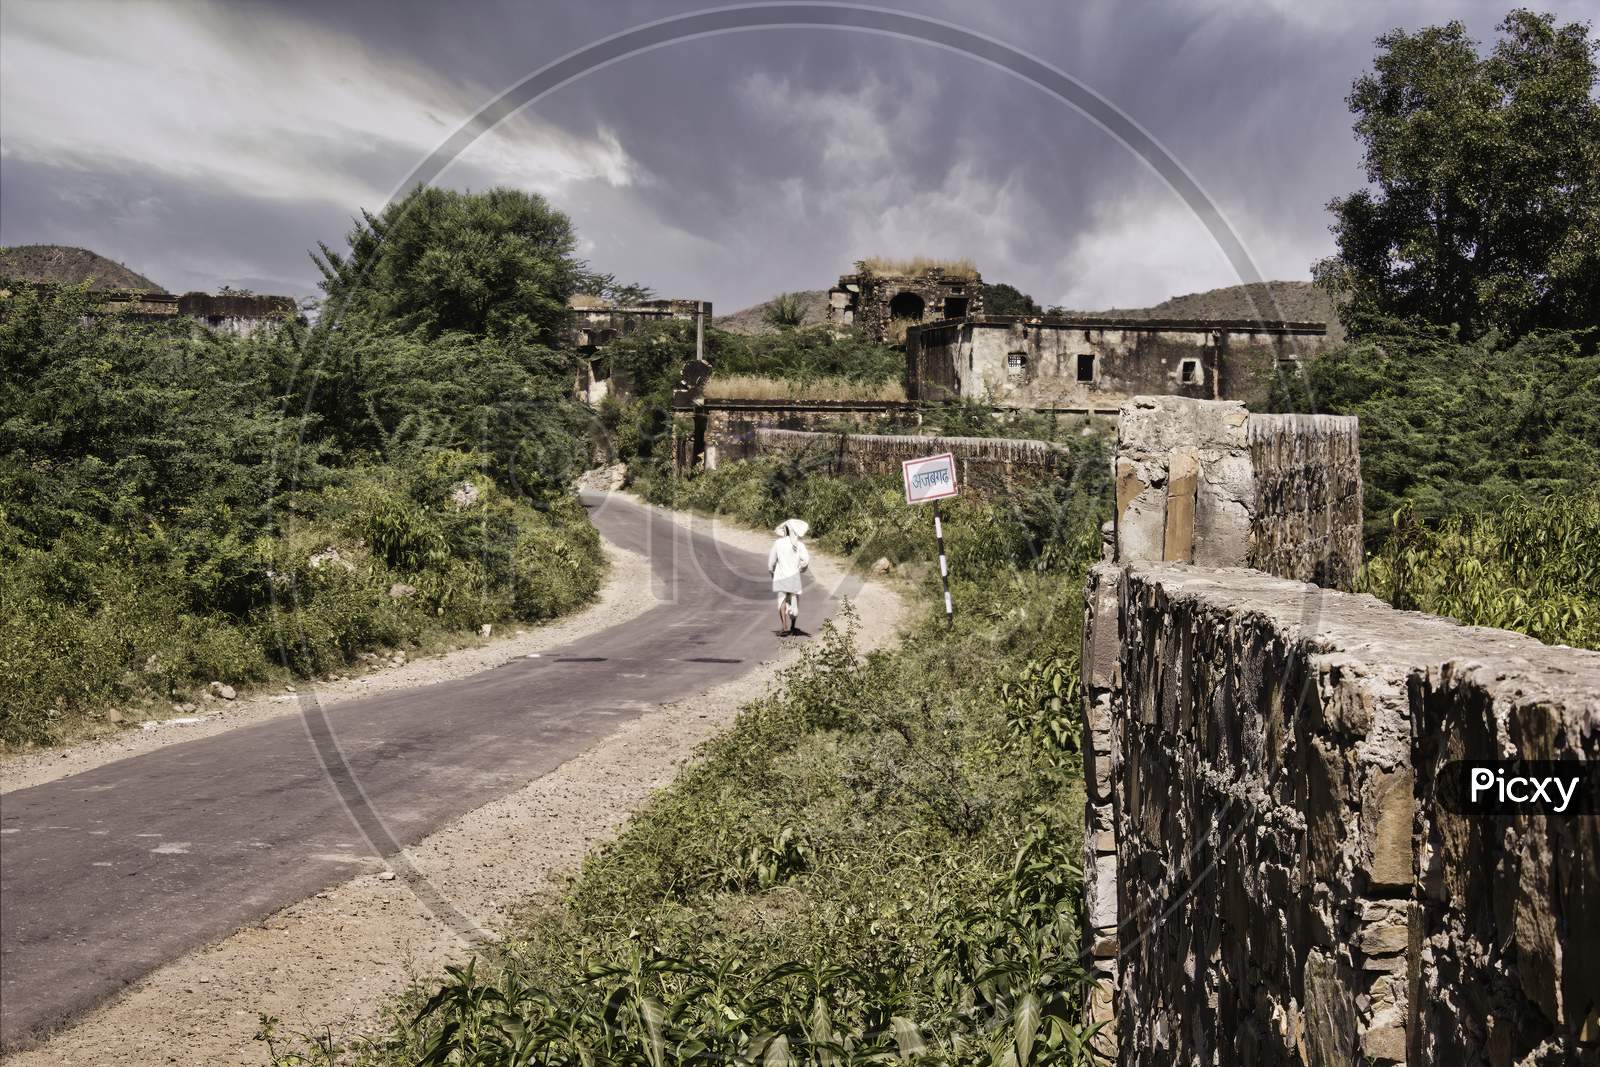 Rajasthan, India - October 06, 2012: A Landscape Surrounding Abandoned Cursed Fort In A Place Named Ajabgarh On A Way To Allegedly Haunted Place Bhangarh Fort